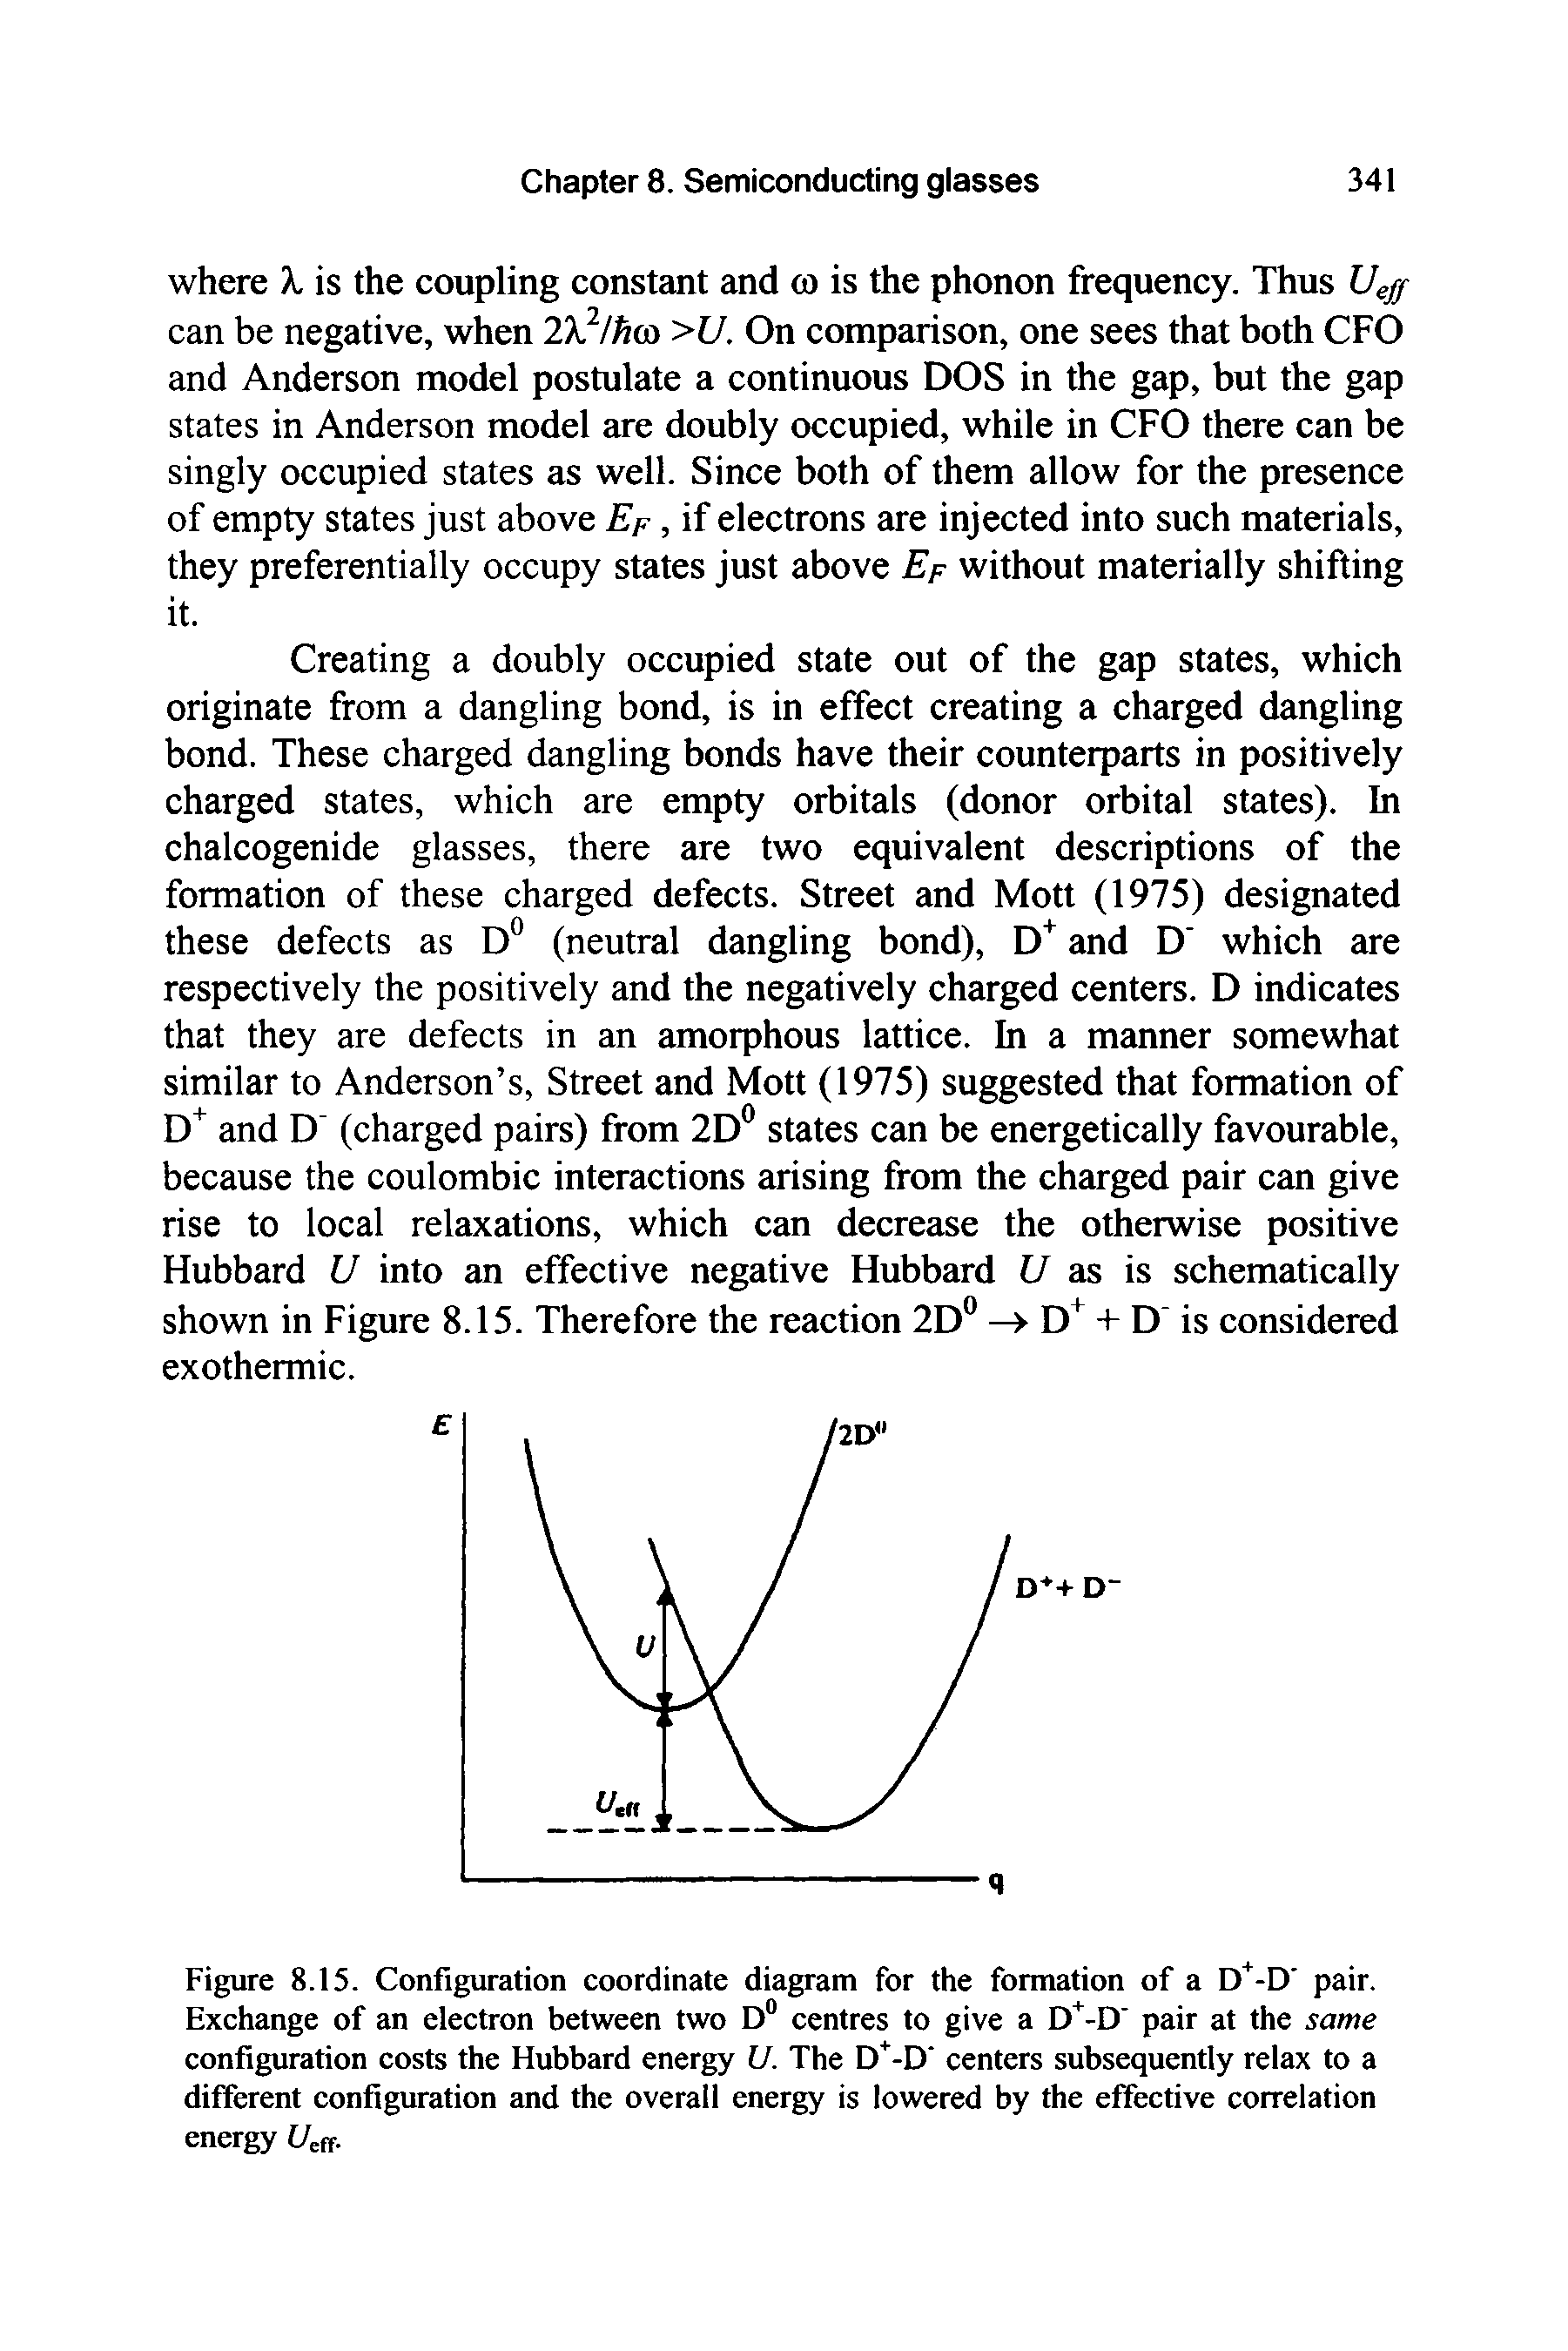 Figure 8.15. Configuration coordinate diagram for the formation of a D -D pair. Exchange of an electron between two D centres to give a D -D pair at the same configuration costs the Hubbard energy U. The D -D centers subsequently relax to a different configuration and the overall energy is lowered by the effective correlation energy t/eff-...